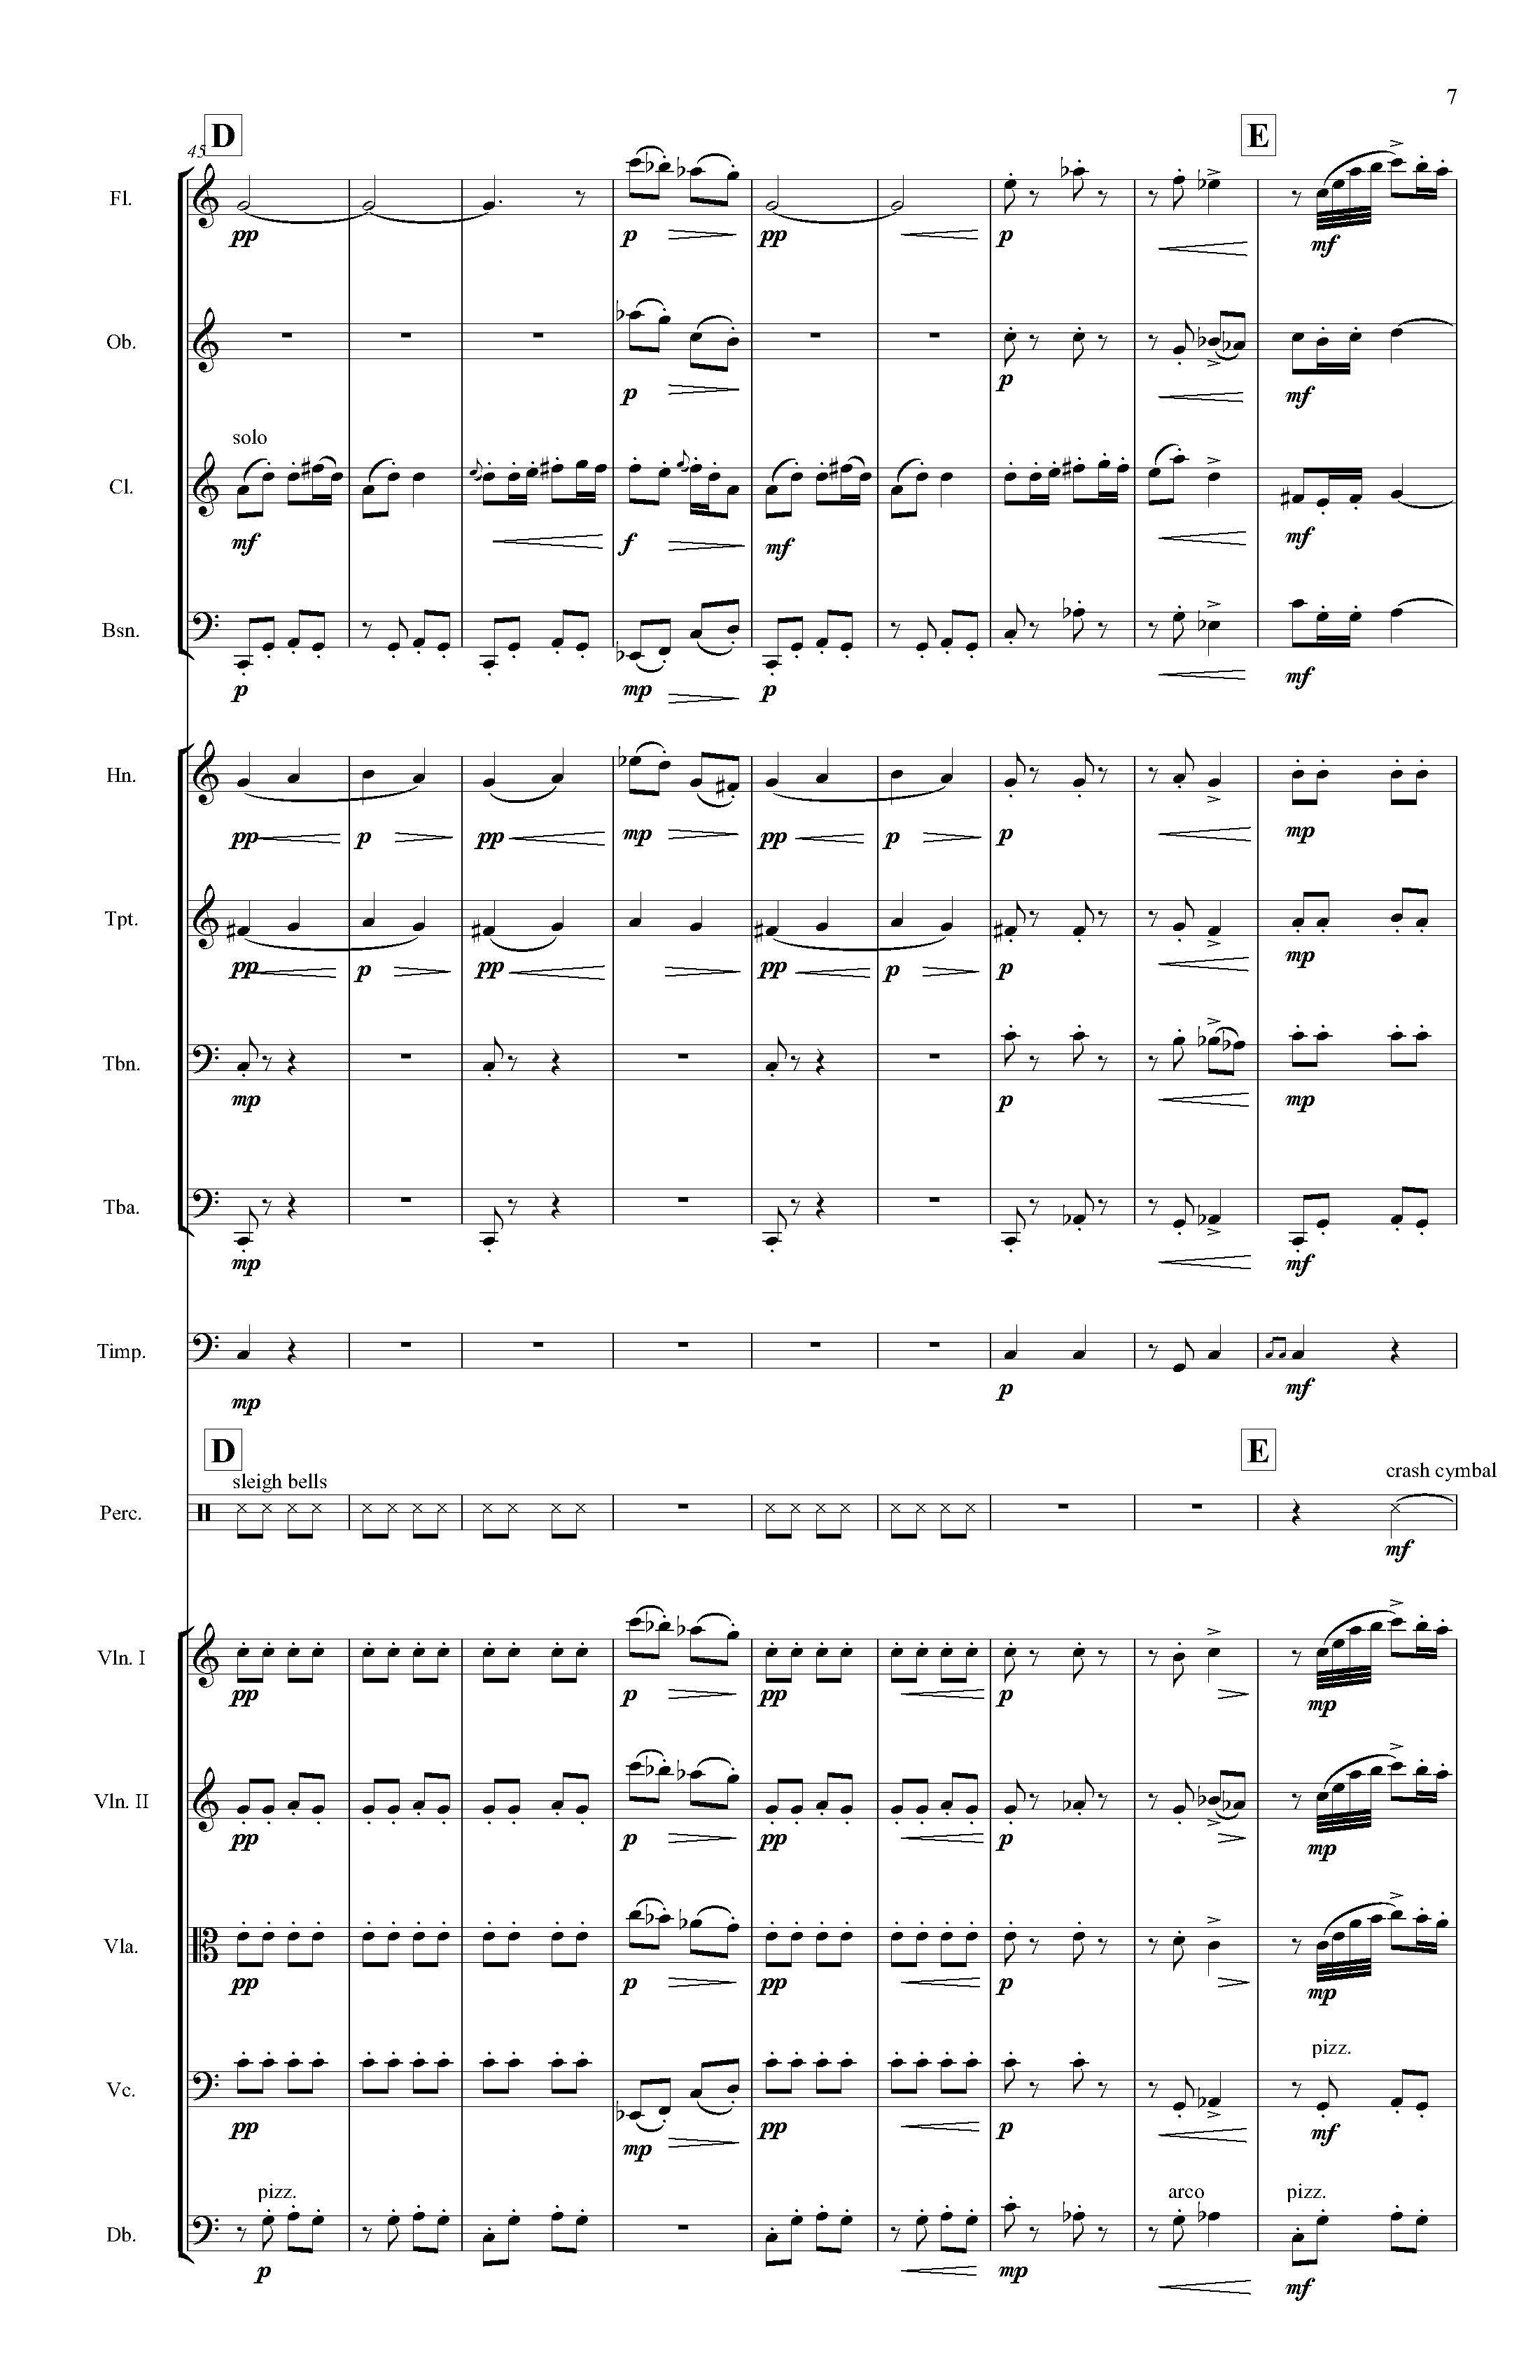 Fantasy on a French Carol - Complete Score_Page_11.jpg